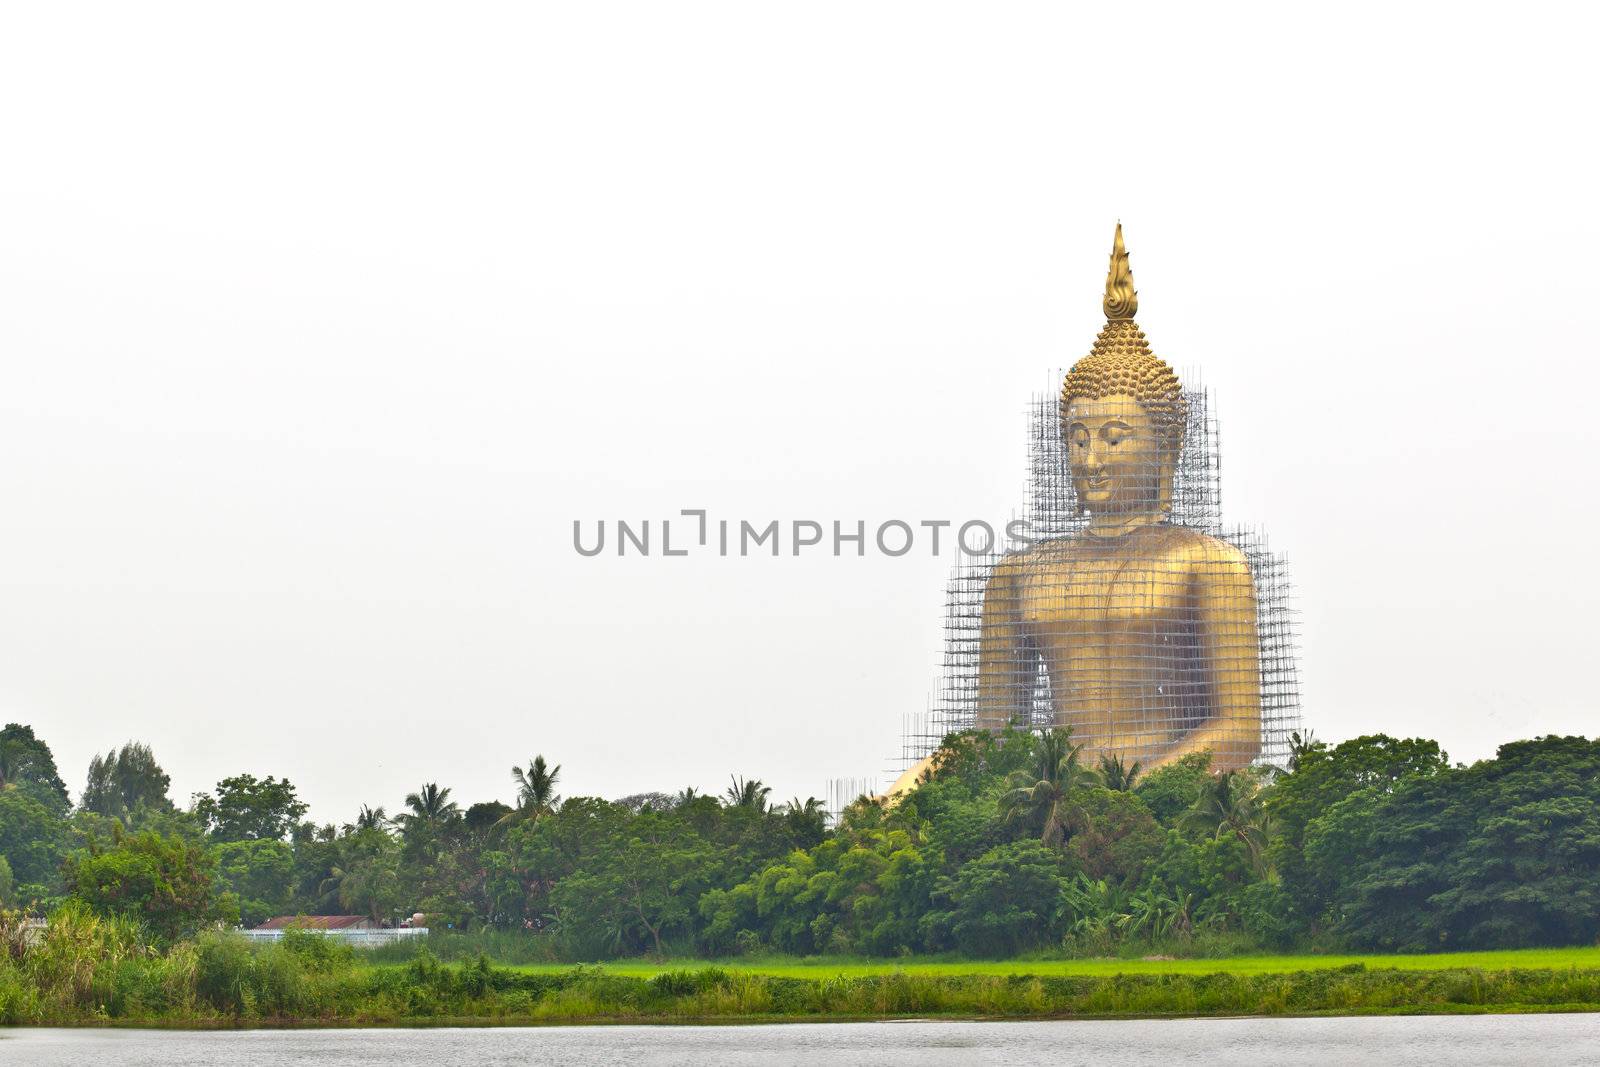 reconstruction of gold buddha by FrameAngel